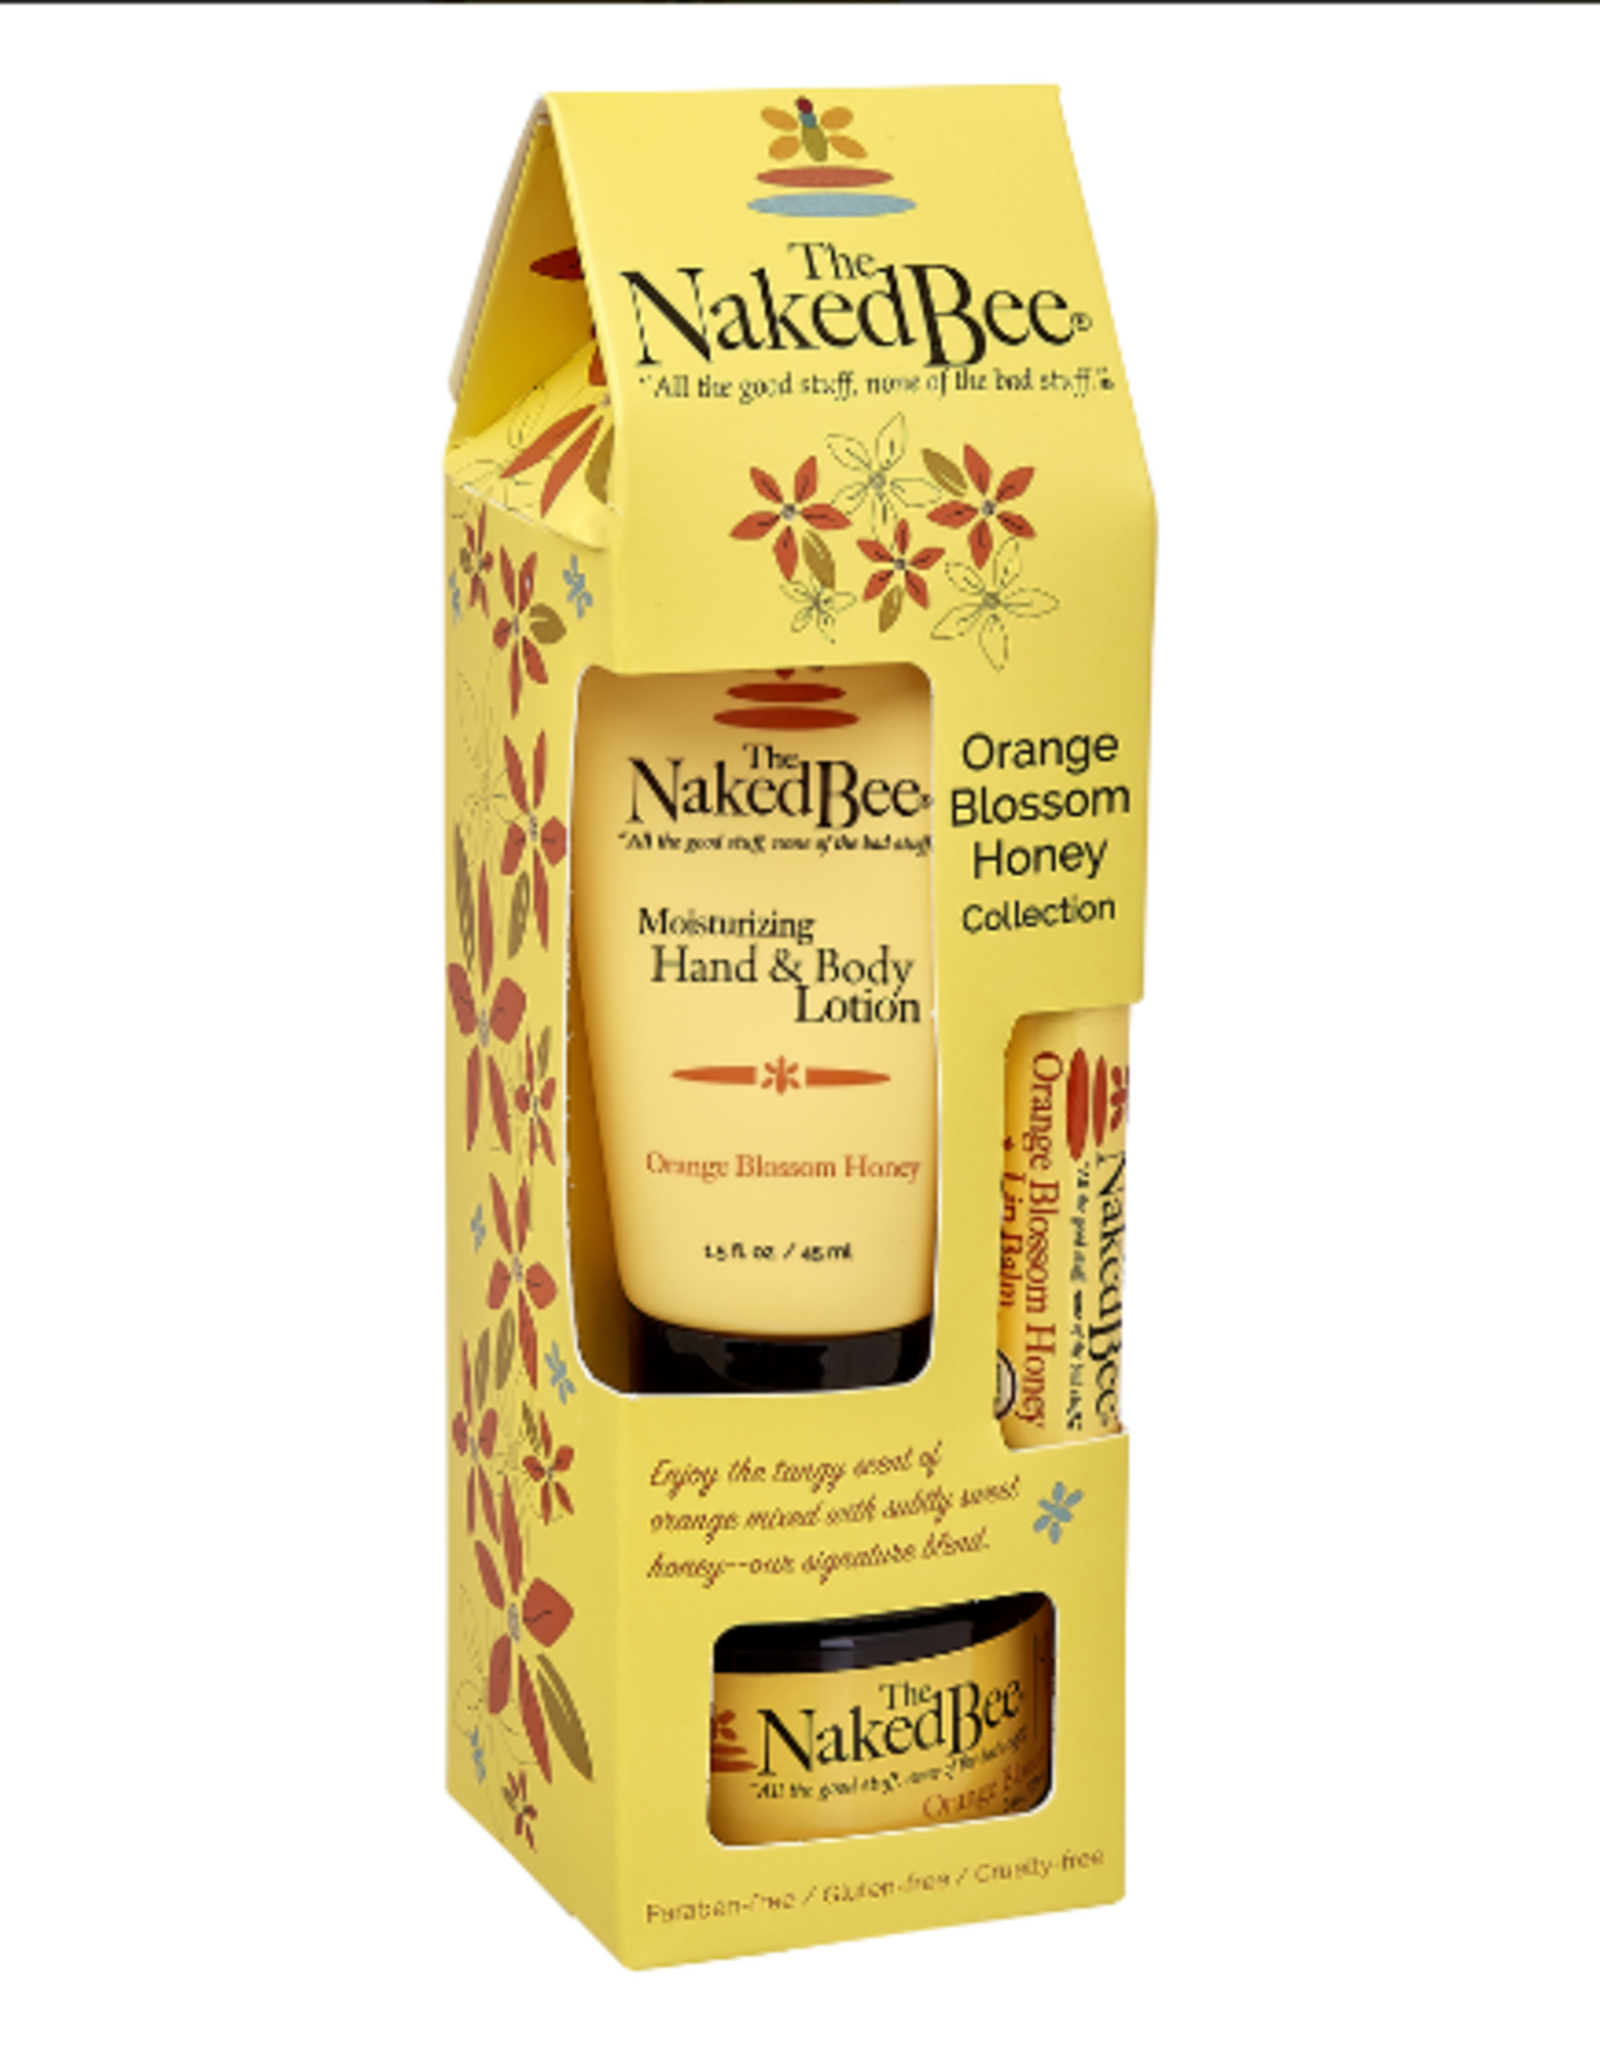 The Naked Bee Naked Bee Orange Blossom Honey Gift Collection - New!